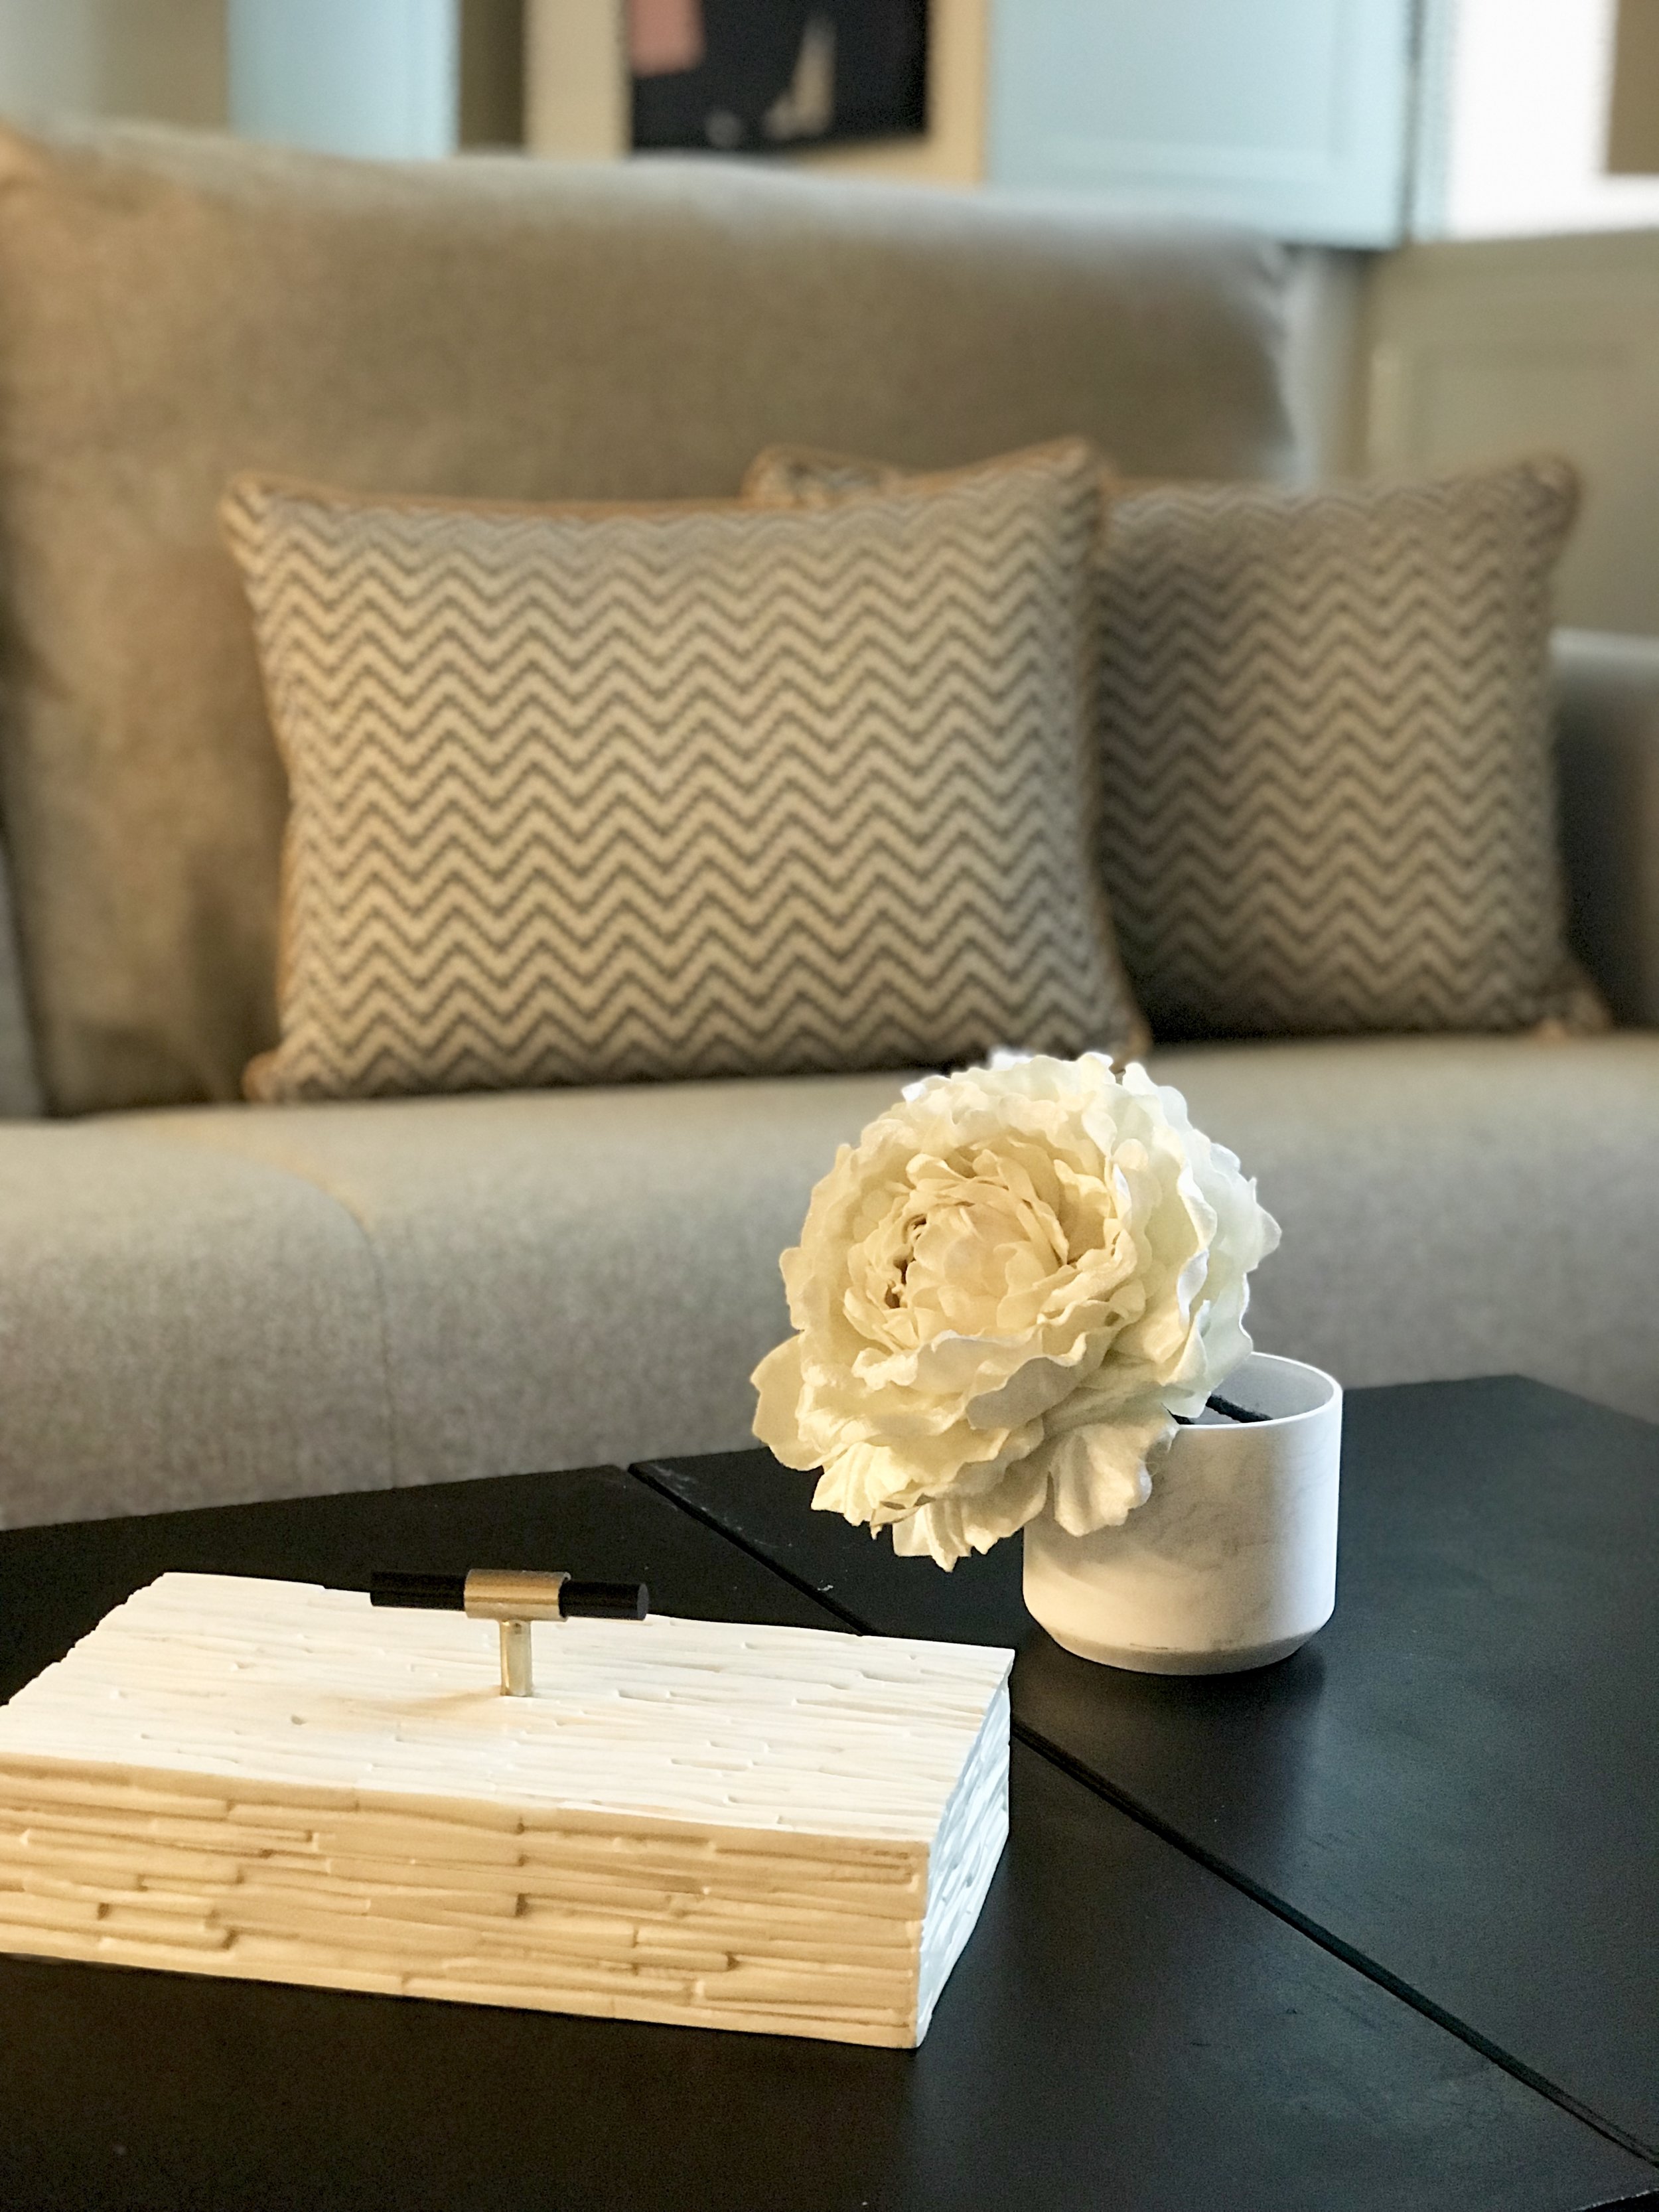 Elegant single white blossom dramatically displayed on a coffee table with sofa.